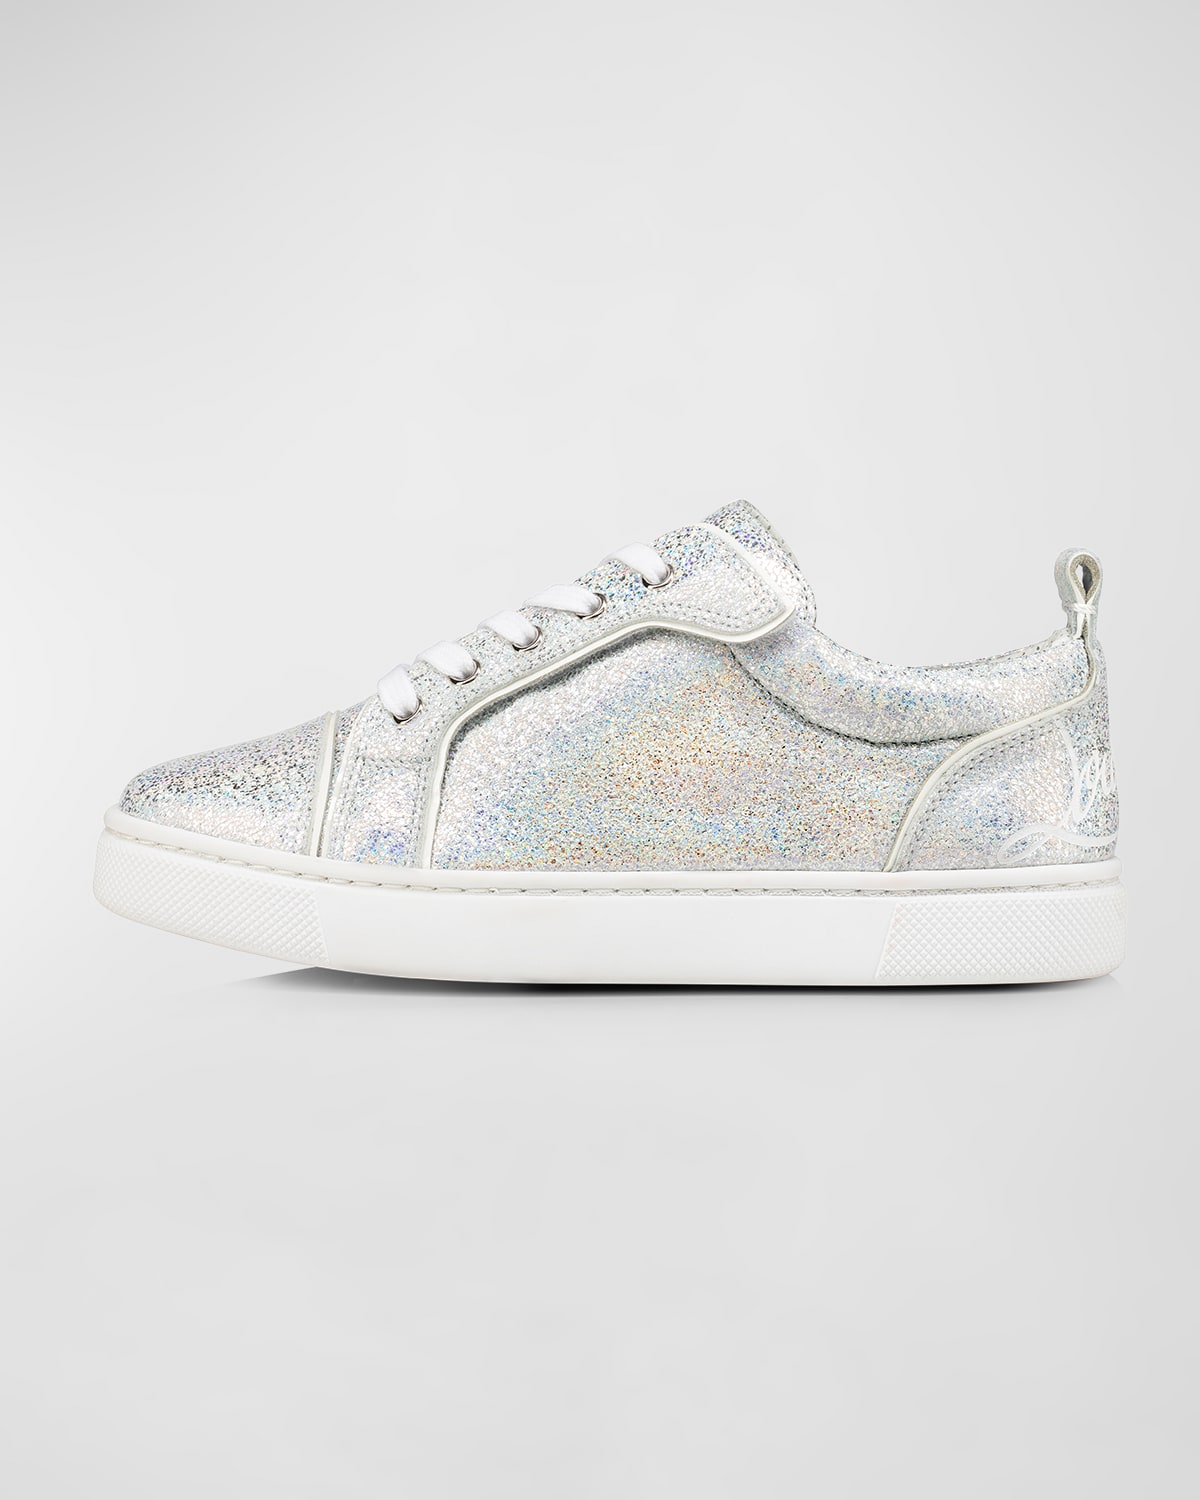 CHRISTIAN LOUBOUTIN GIRL'S FUNNYTO SPARKLE LEATHER SNEAKERS, TODDLER/KIDS